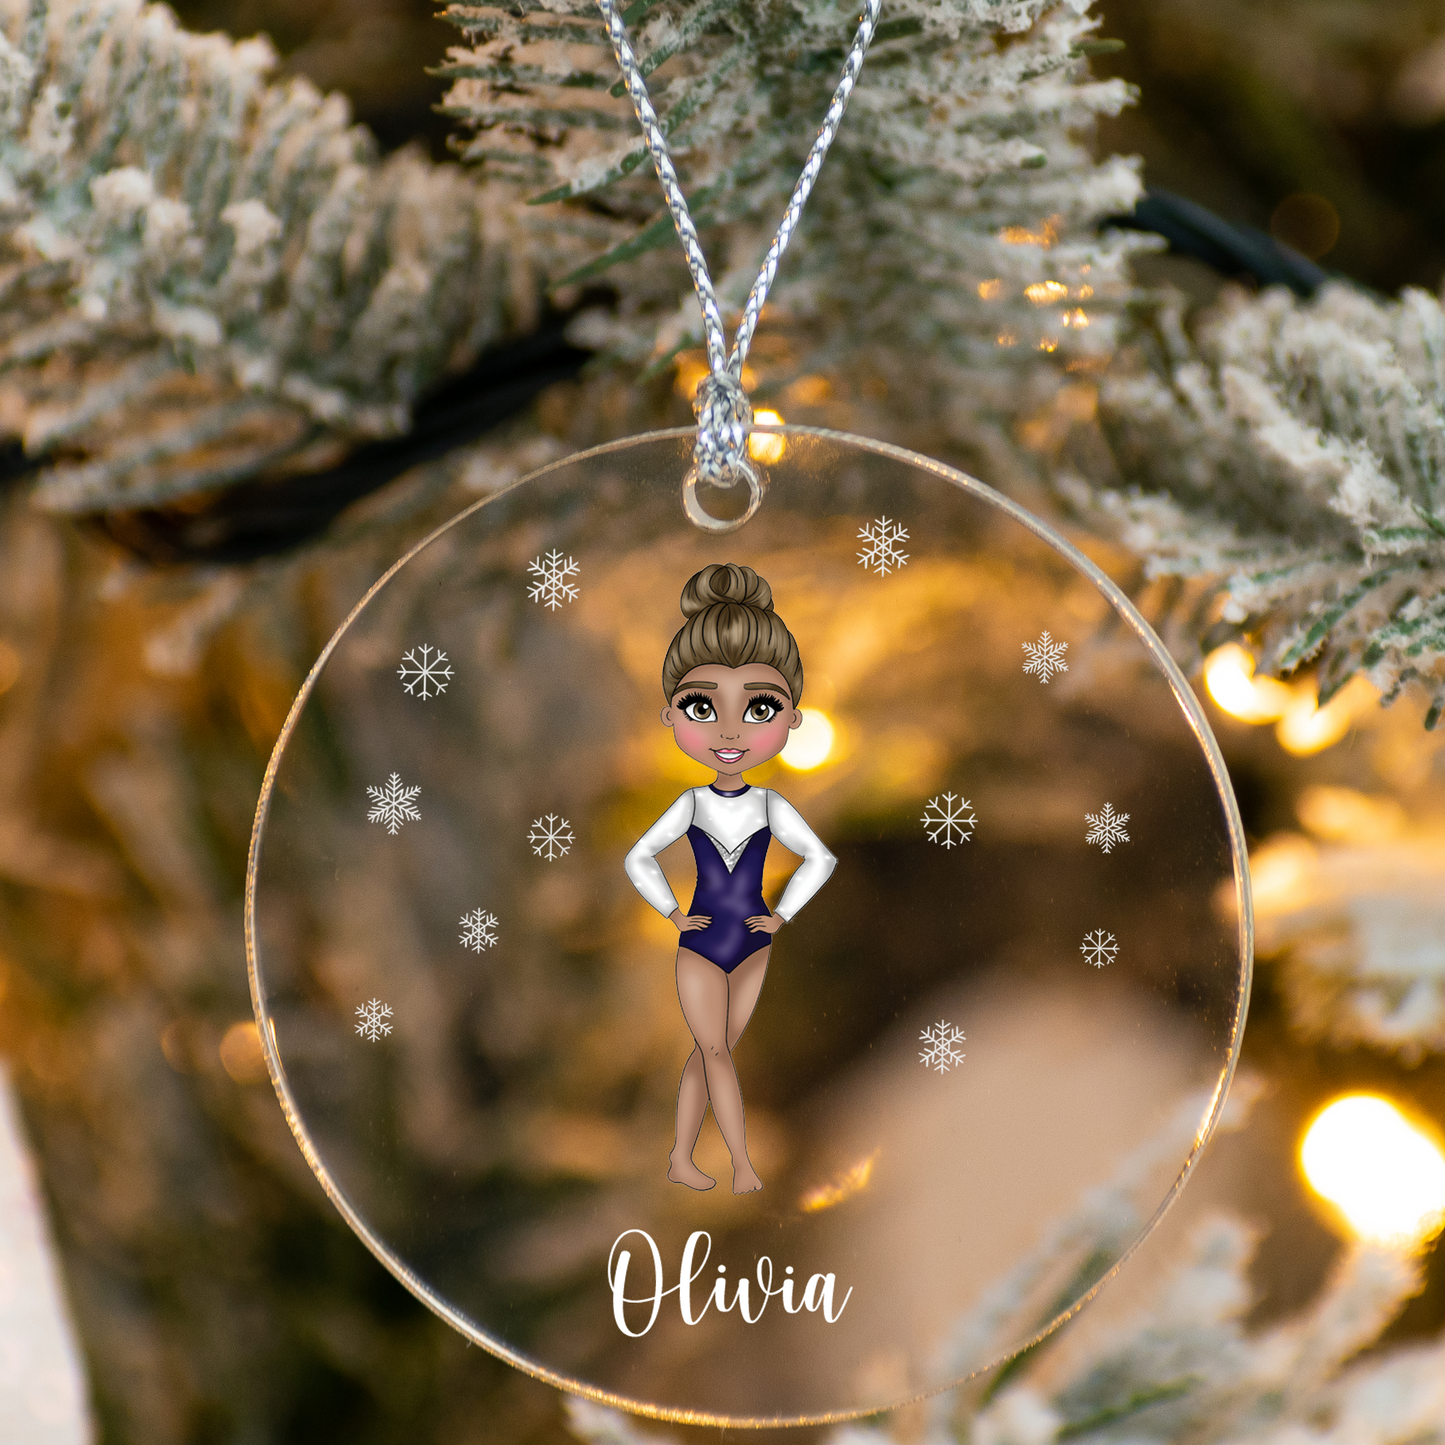 Gymnast Ornament with Personalized Engraved Name